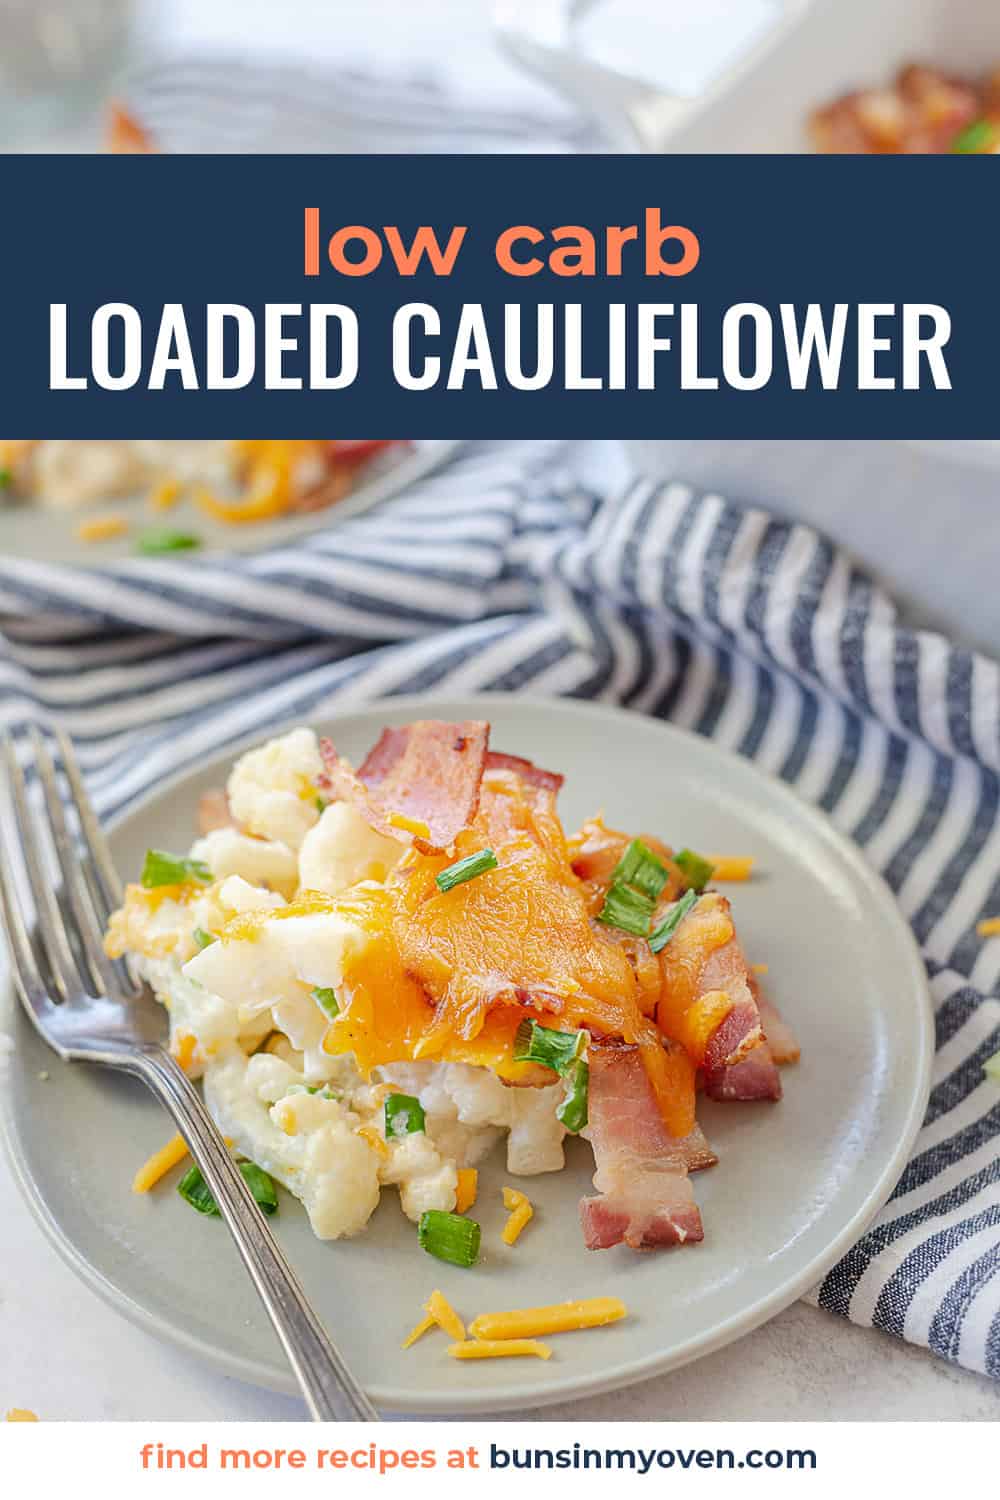 low carb cauliflower casserole on small plate.